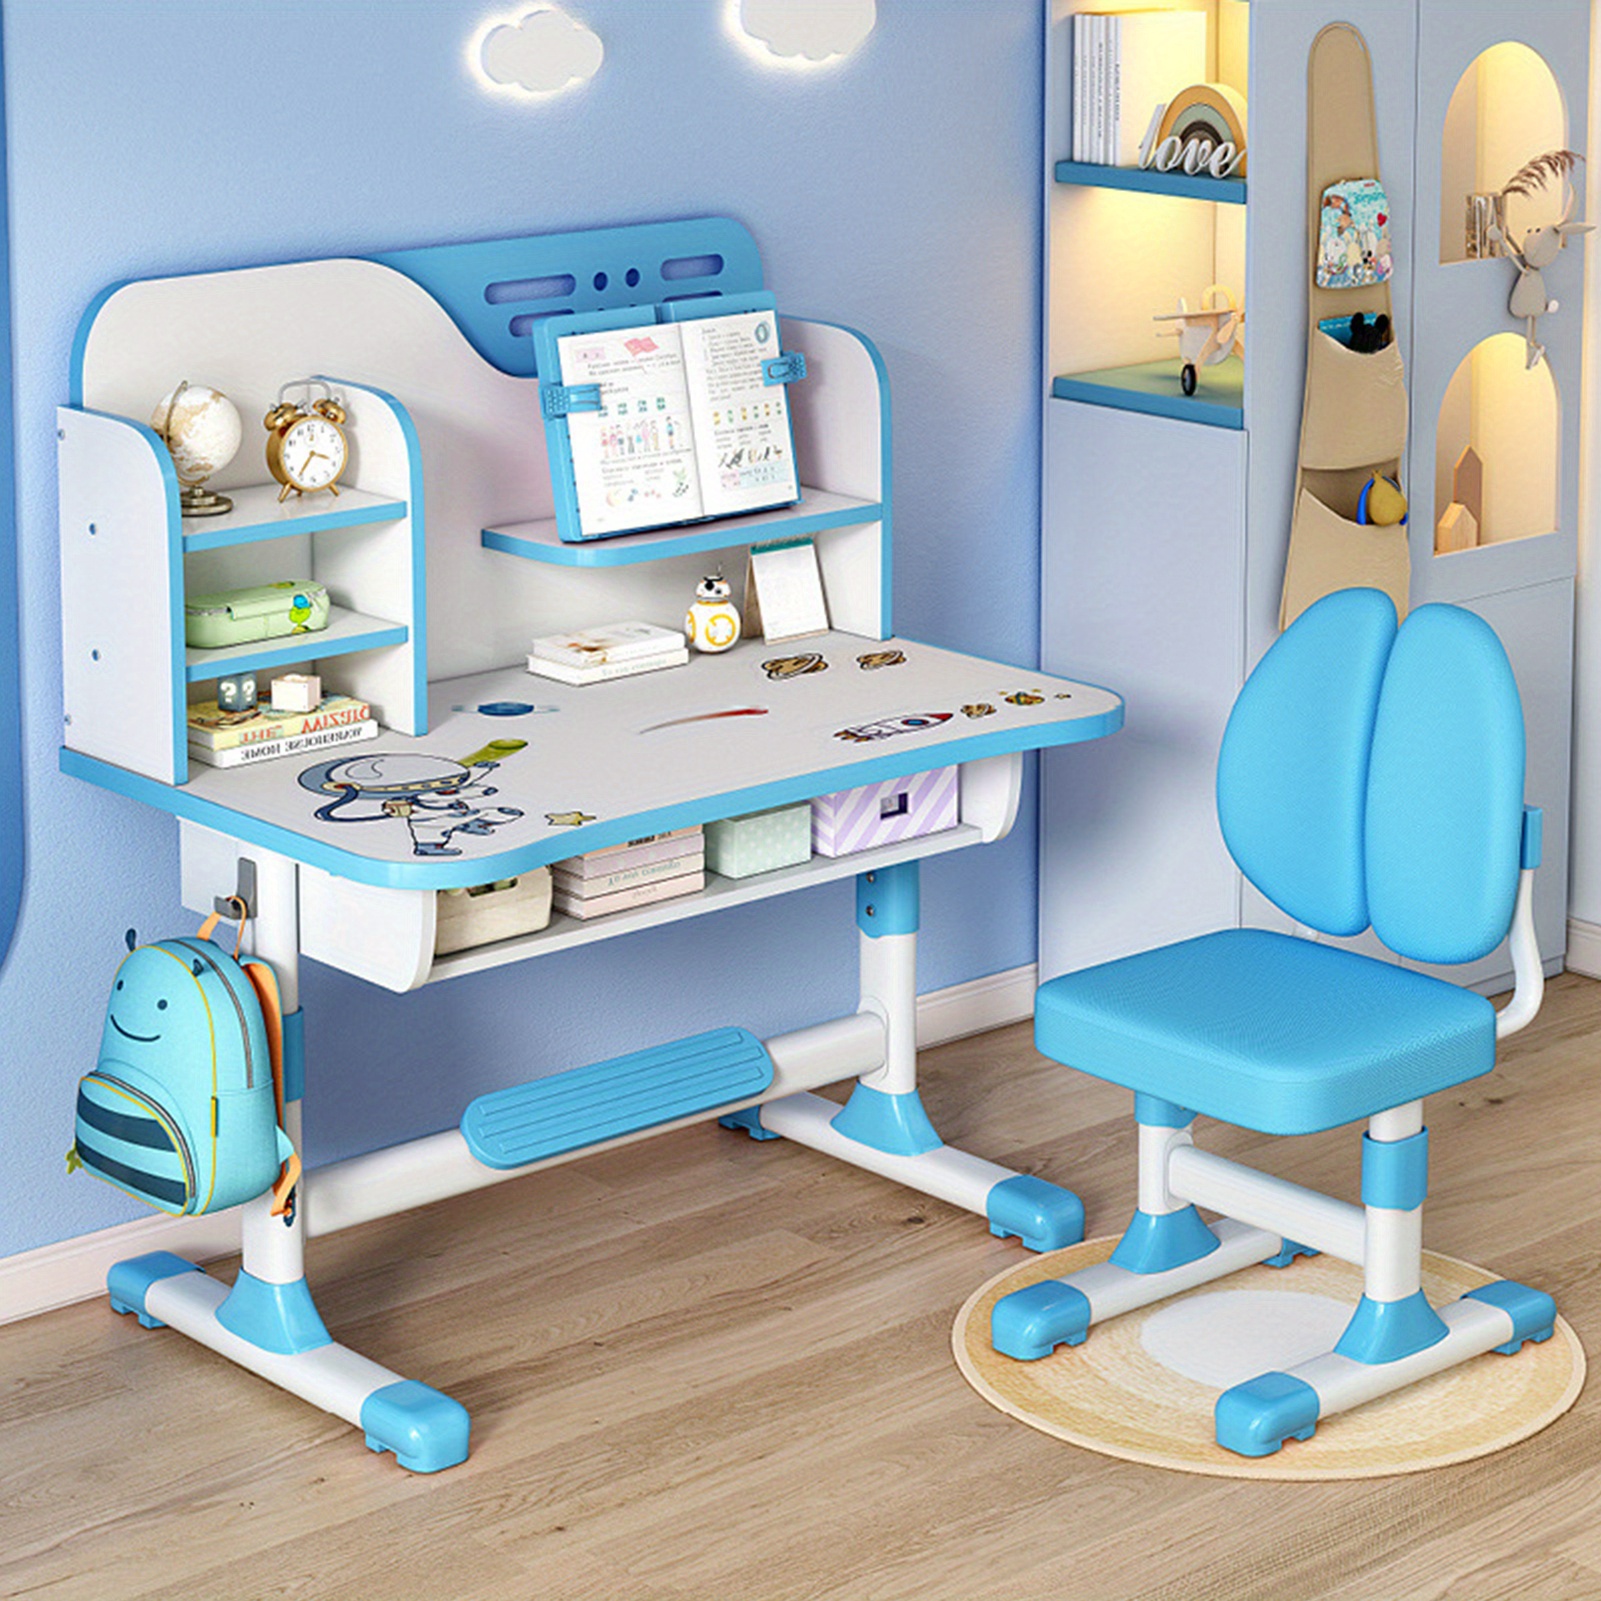 

A Set Of 43.73x31.52x21.28 Inches High Quality Children's Study Table And Chair Set, Height Adjustable Children's School Study Table And Chair Set With Astronaut Motif, Ergonomic Desks And Chairs